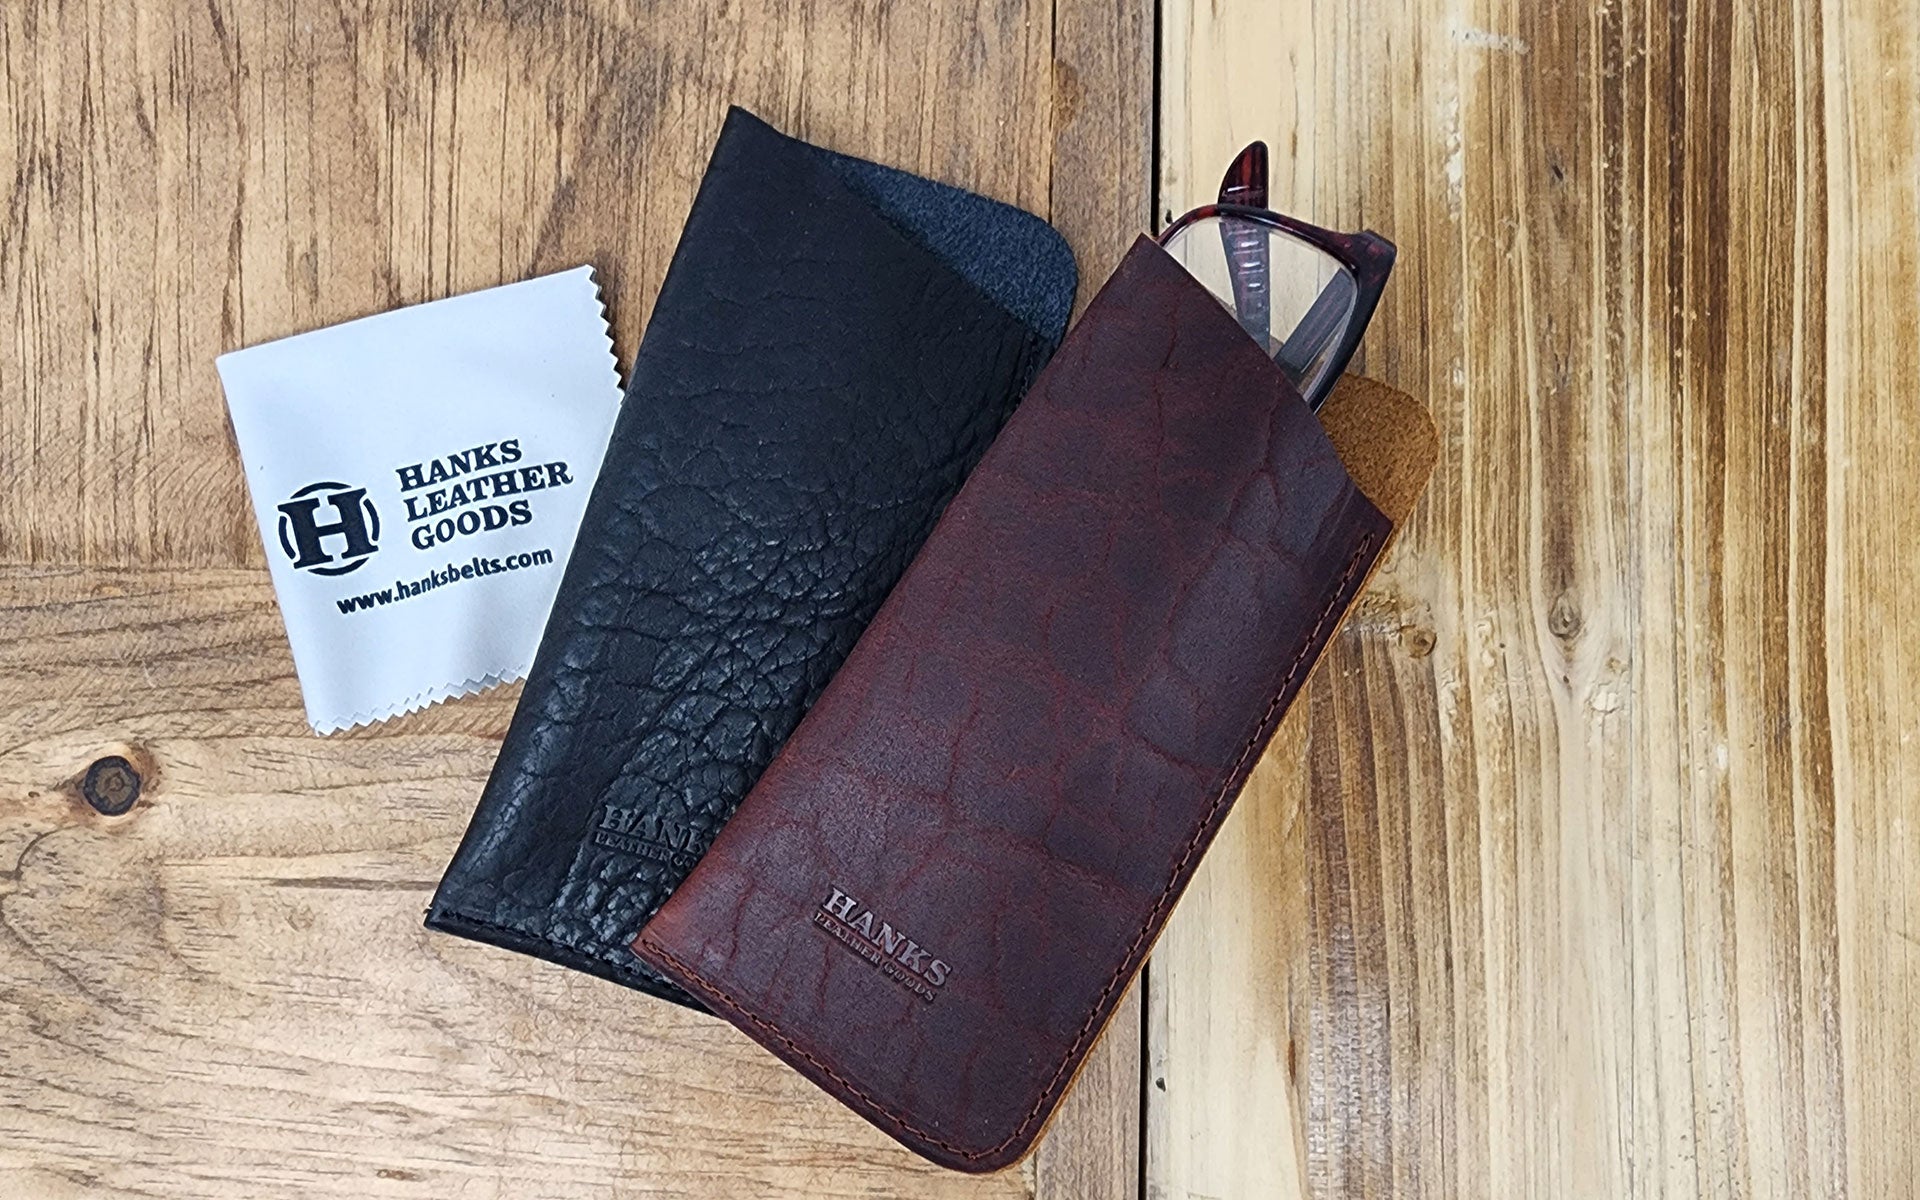 Black and Brown Bison eyeglass cases with glasses in the case and cleaning cloth next to the cases on wooden backgrouond